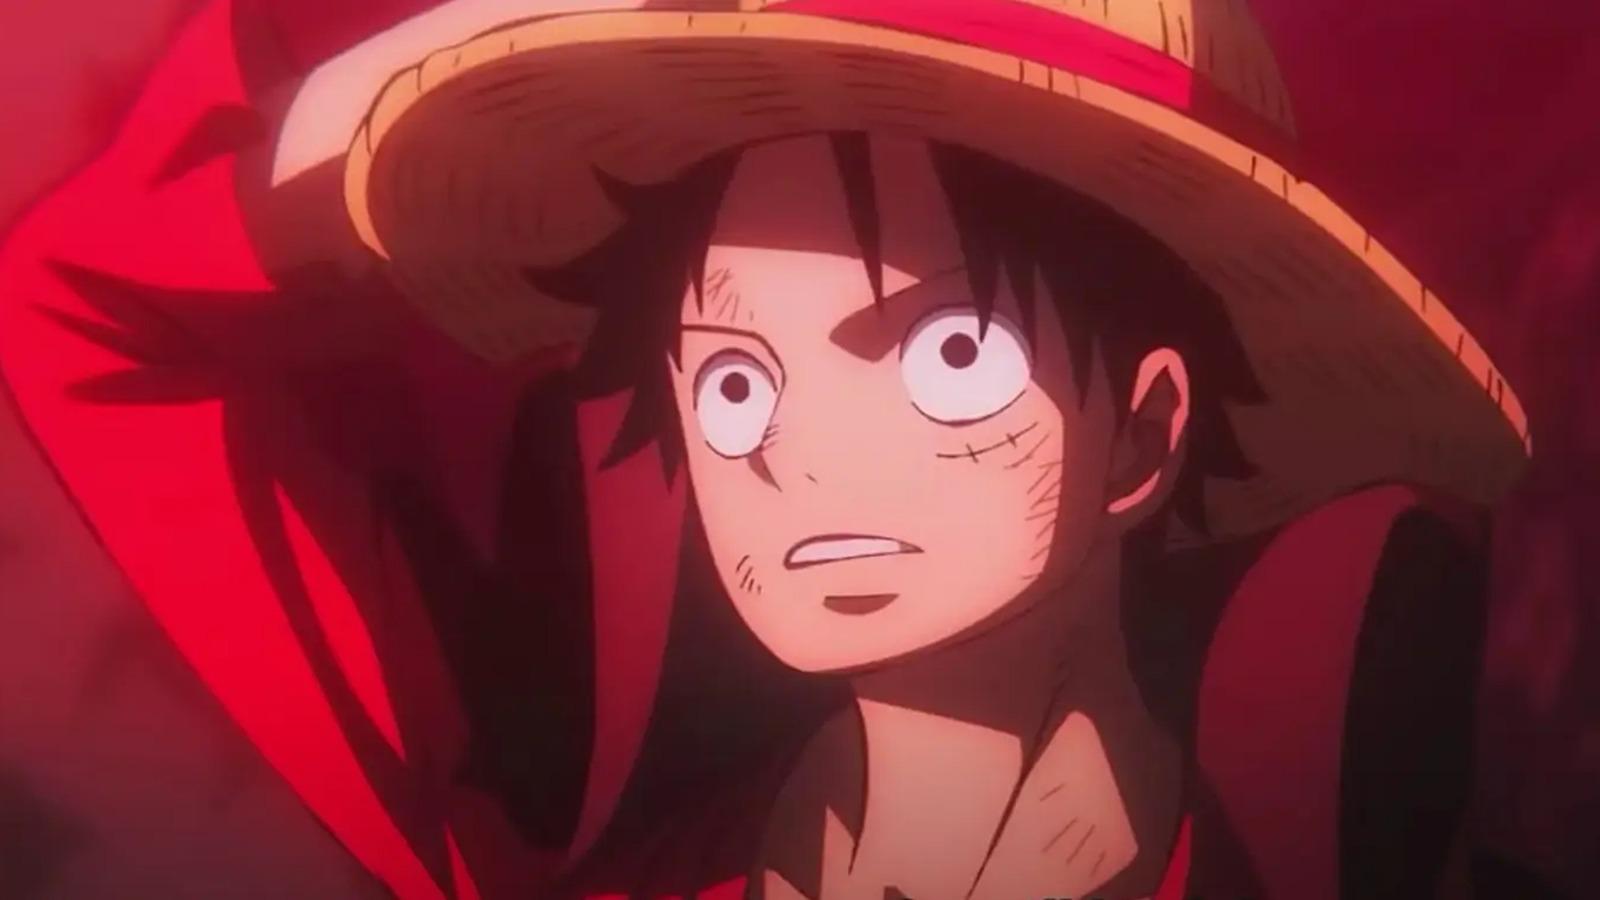 An image of Monkey D. Luffy from One Piece